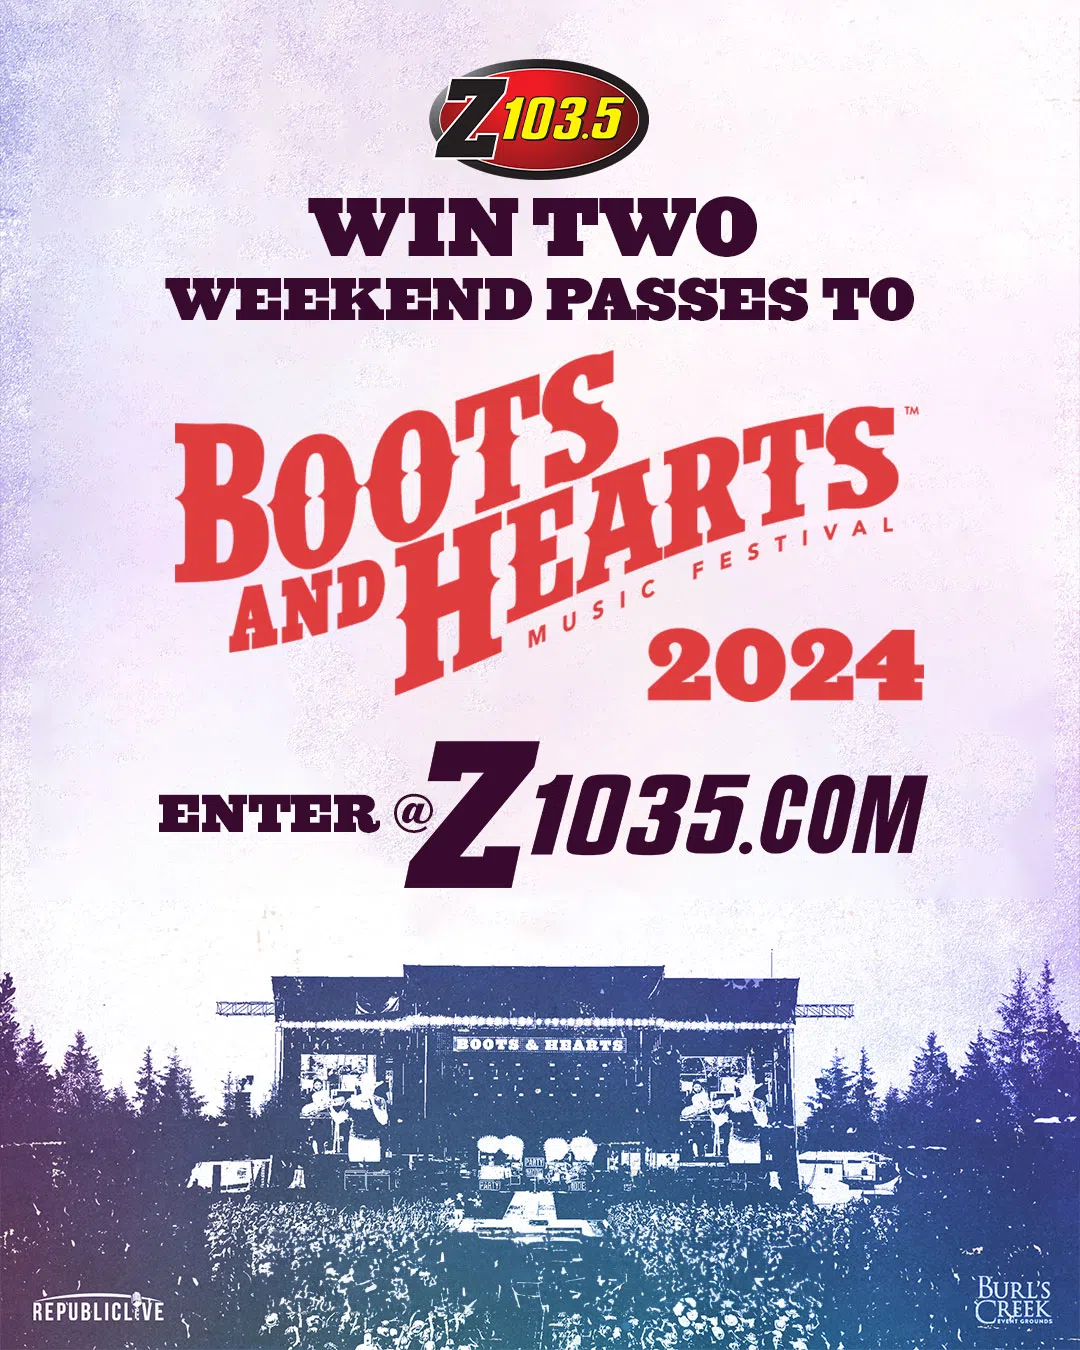 Feature: https://z1035.com/win/enter-to-win-2-ga-passes-to-boots-and-hearts/